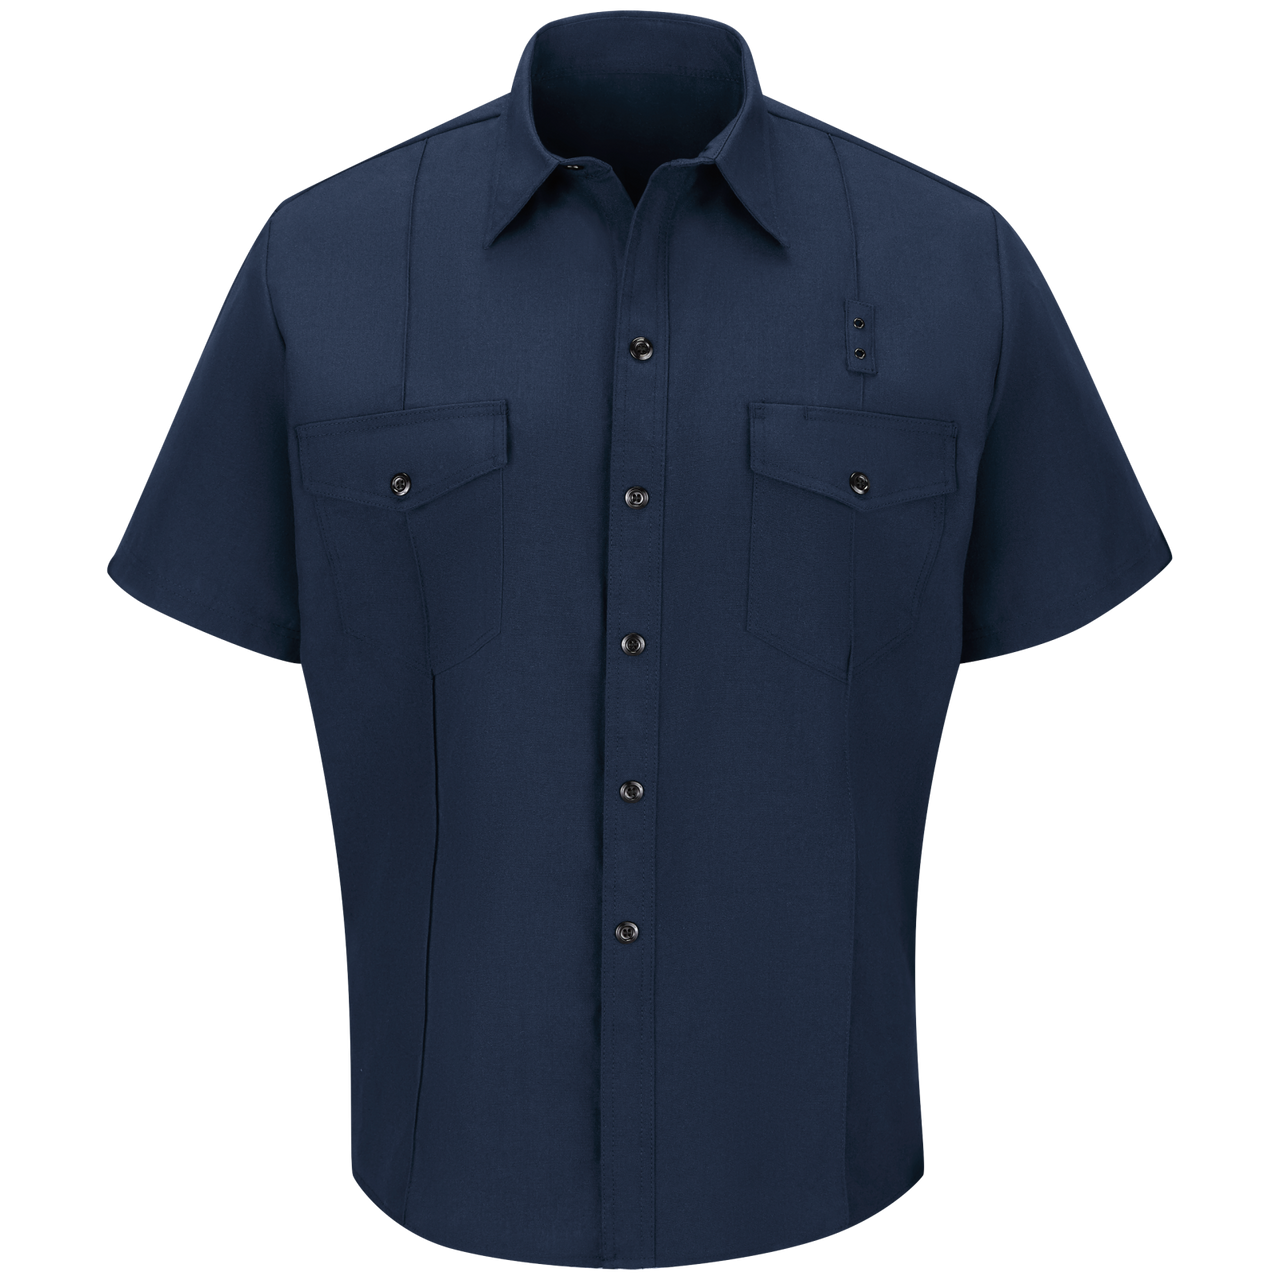 Workrite Classic Short Sleeve Firefighter Shirt (FSF2)) | Fire Store | Fuego Fire Center | Firefighter Gear | Made with durable, flame-resistant Nomex® IIIA fabric and autoclaved with our proprietary PerfectPress® process to give you a professional appearance that lasts. Featuring details like lined, banded collars and reinforced stitching, designed to support your needs.